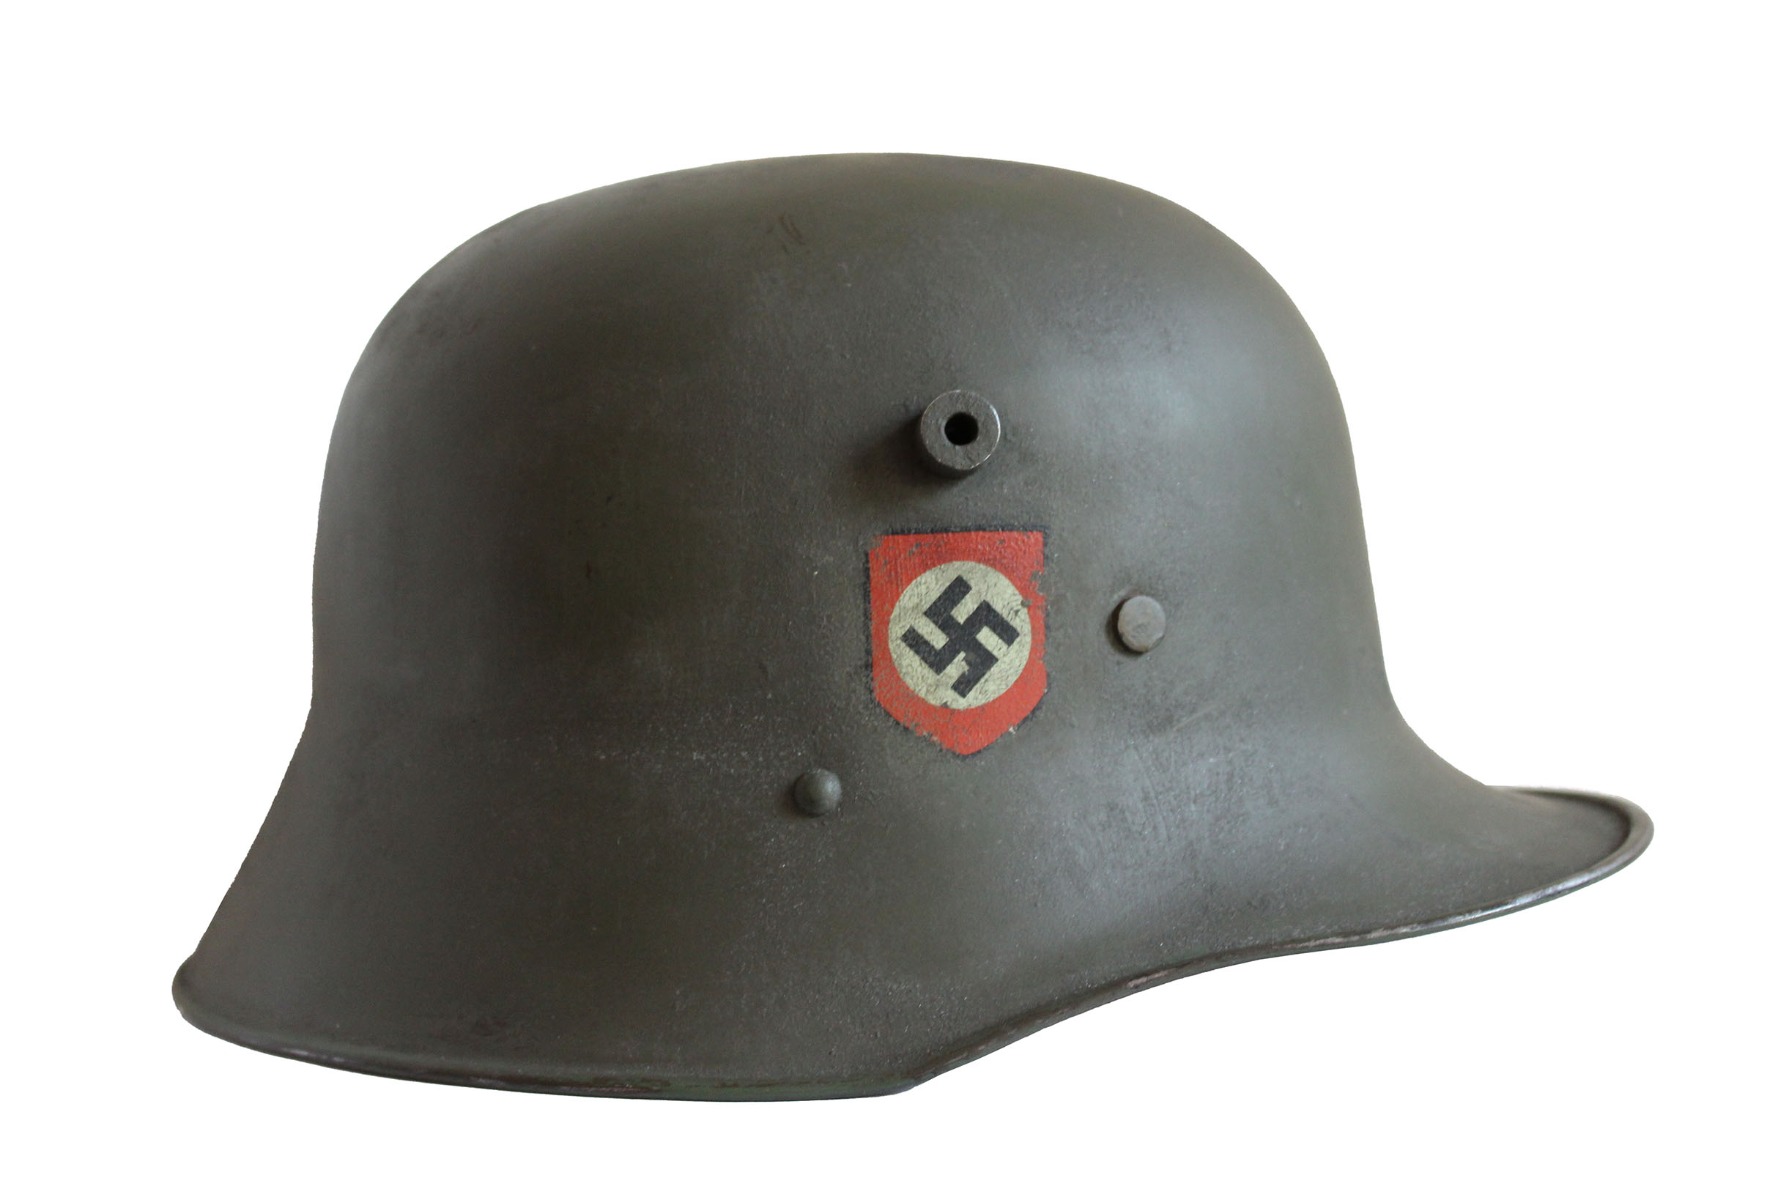 M1916 AUSTRIAN ARMY FIELD POLICE HELMET WITH LINER AND CHIN STRAP - ORIGINAL